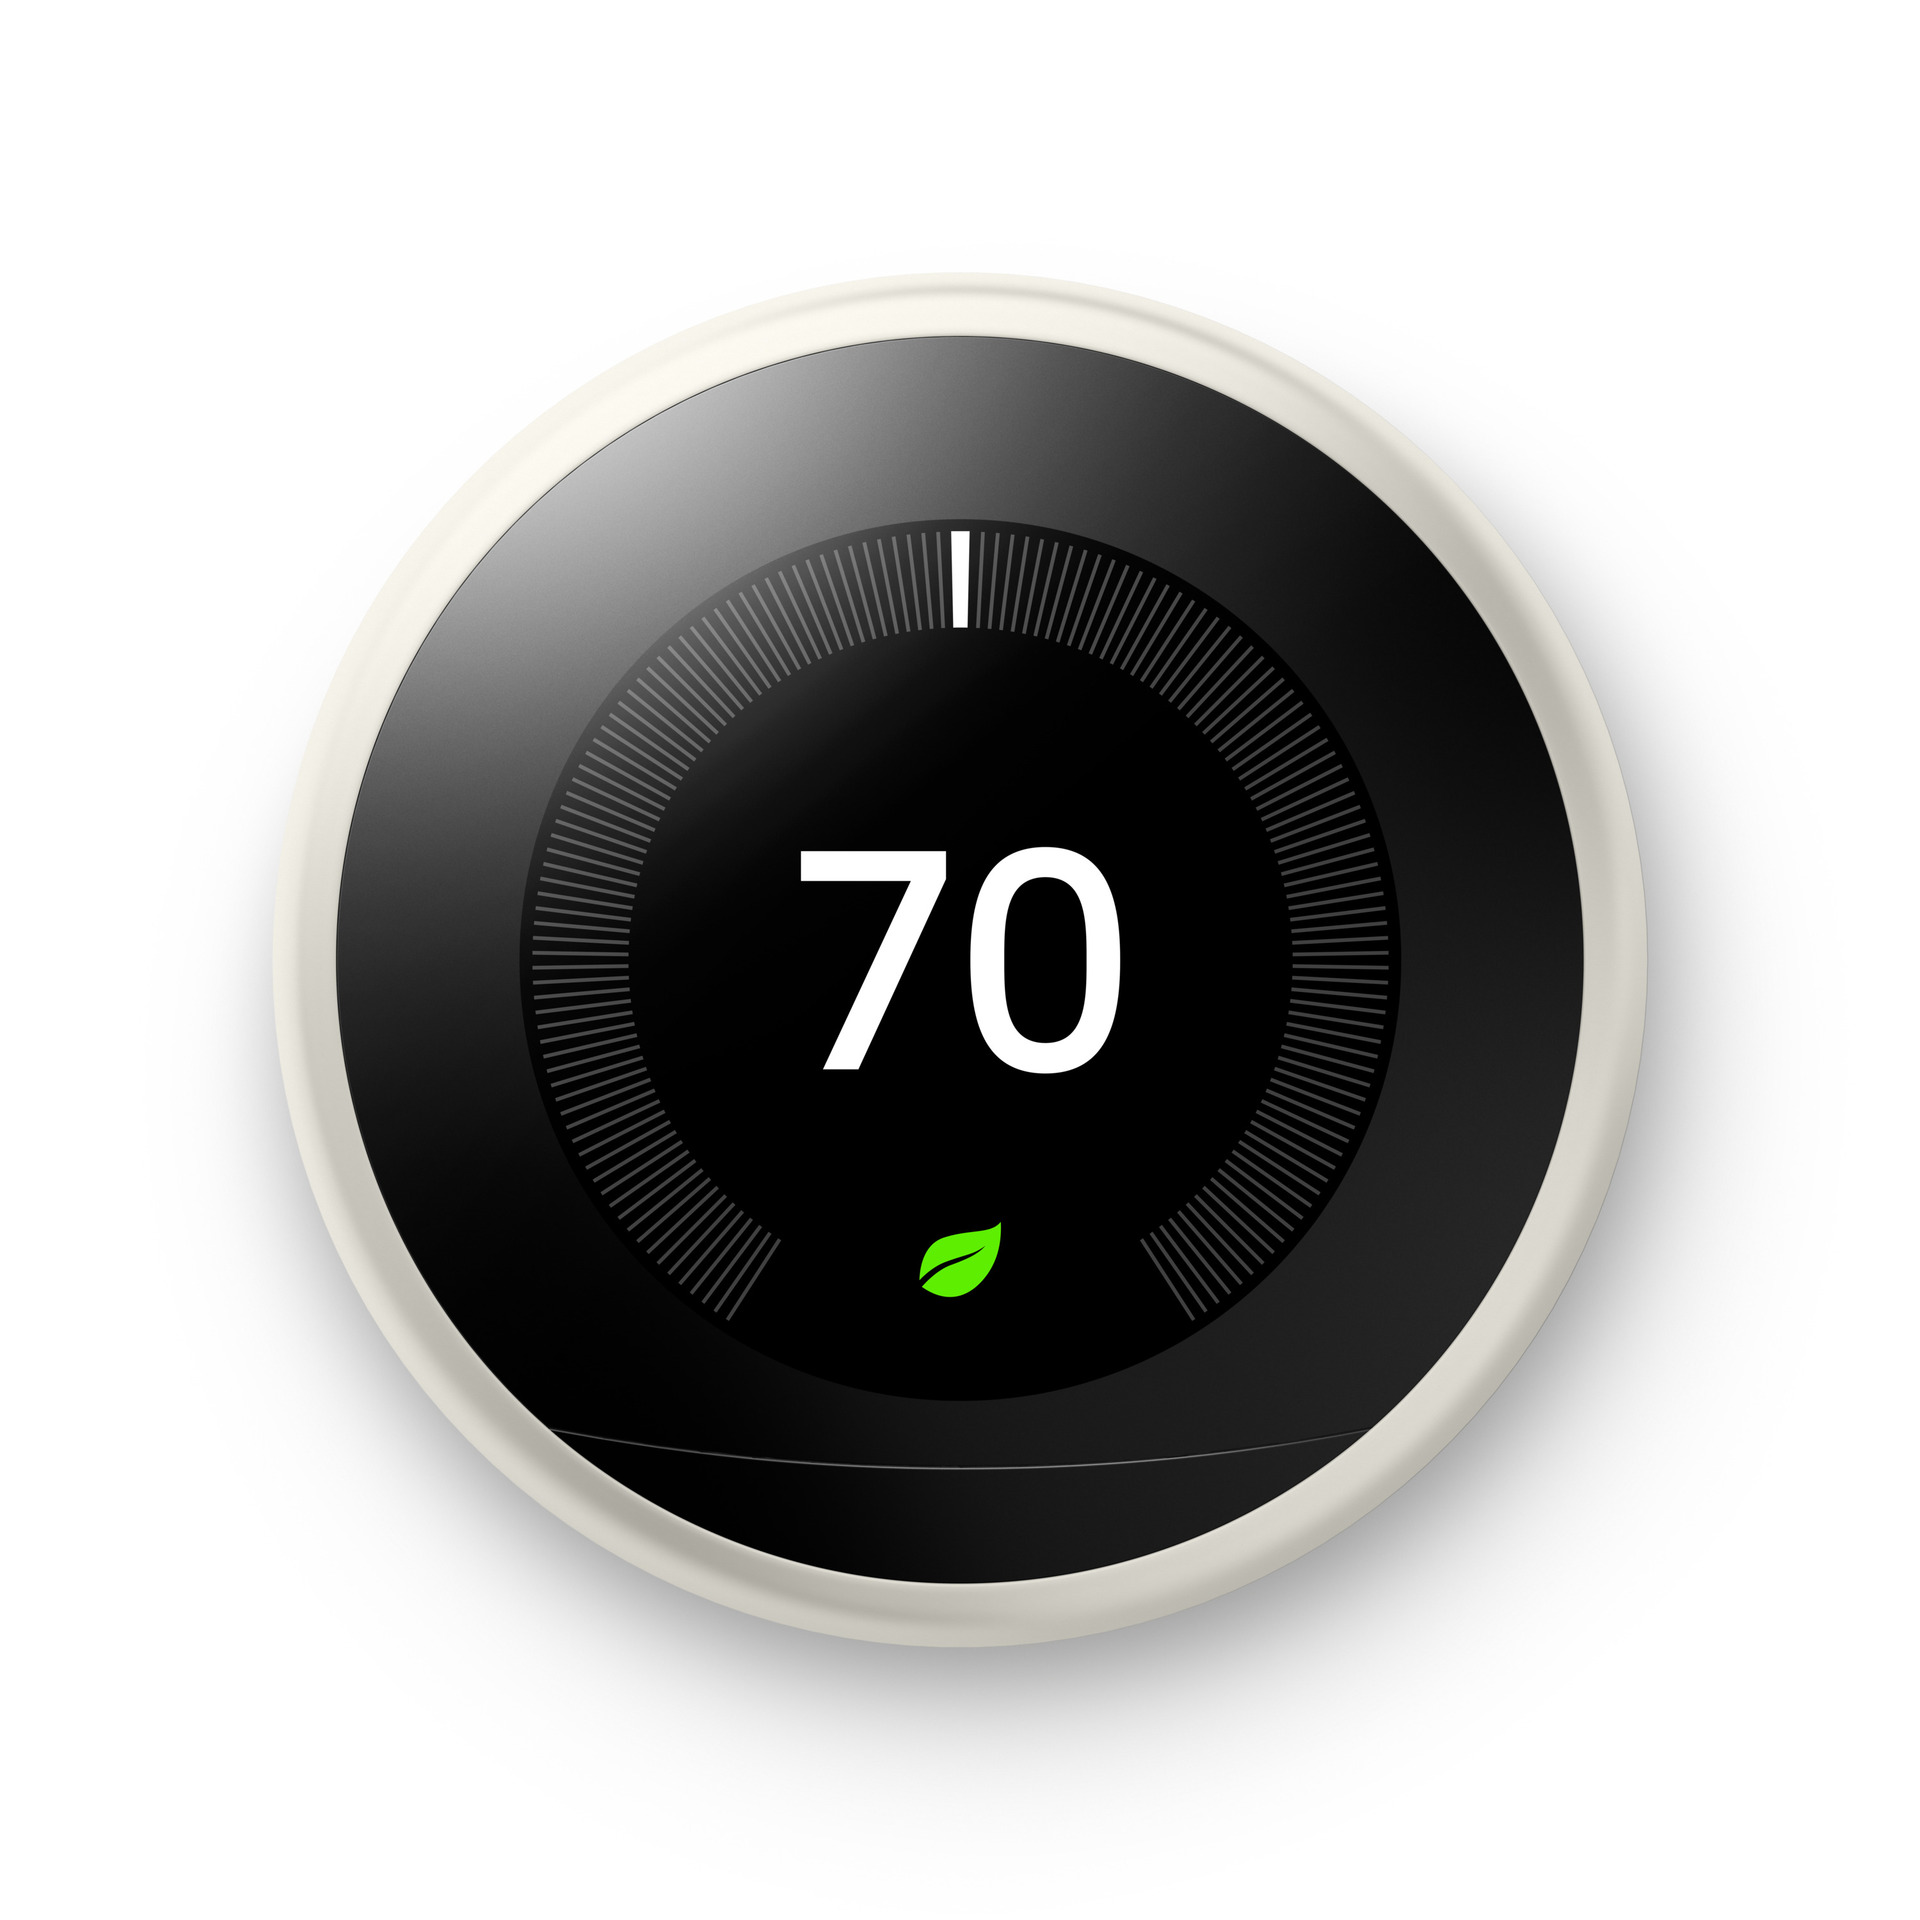 Google Nest Learning Thermostat 3rd Generation - Works with Google